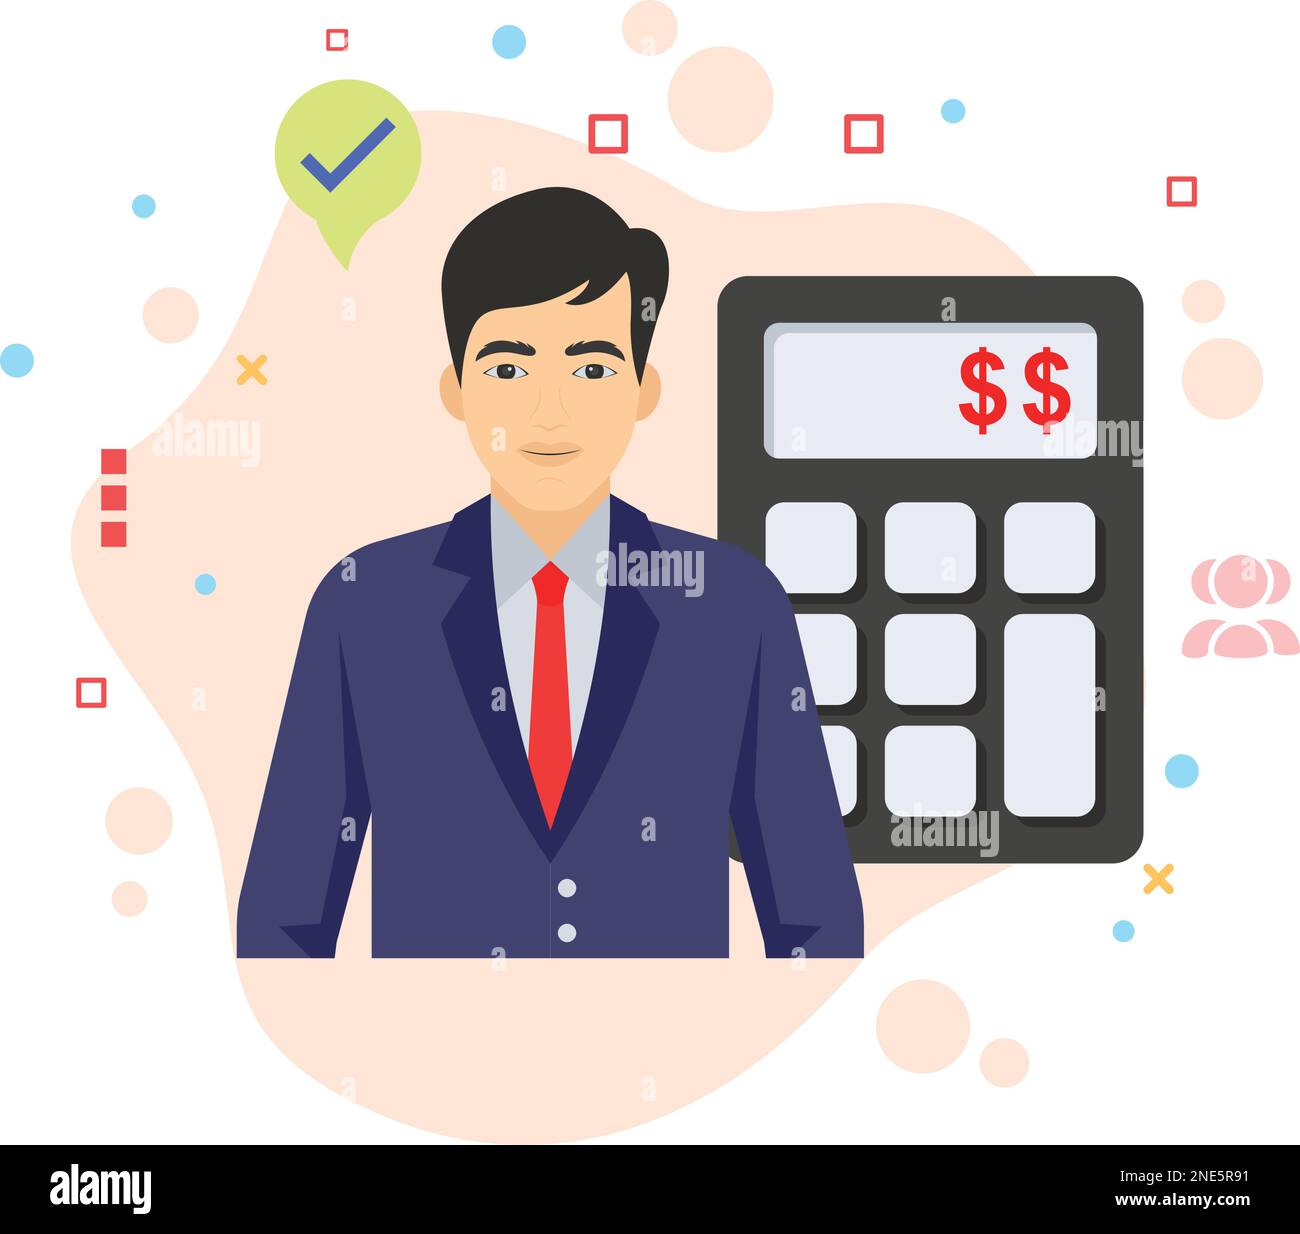 HR budget Vector Color Icon design, Businessman with Calculation Stock Illustration, hr sign, Human Resrouce Cost and Expense Concept, hrm symbol Stock Vector